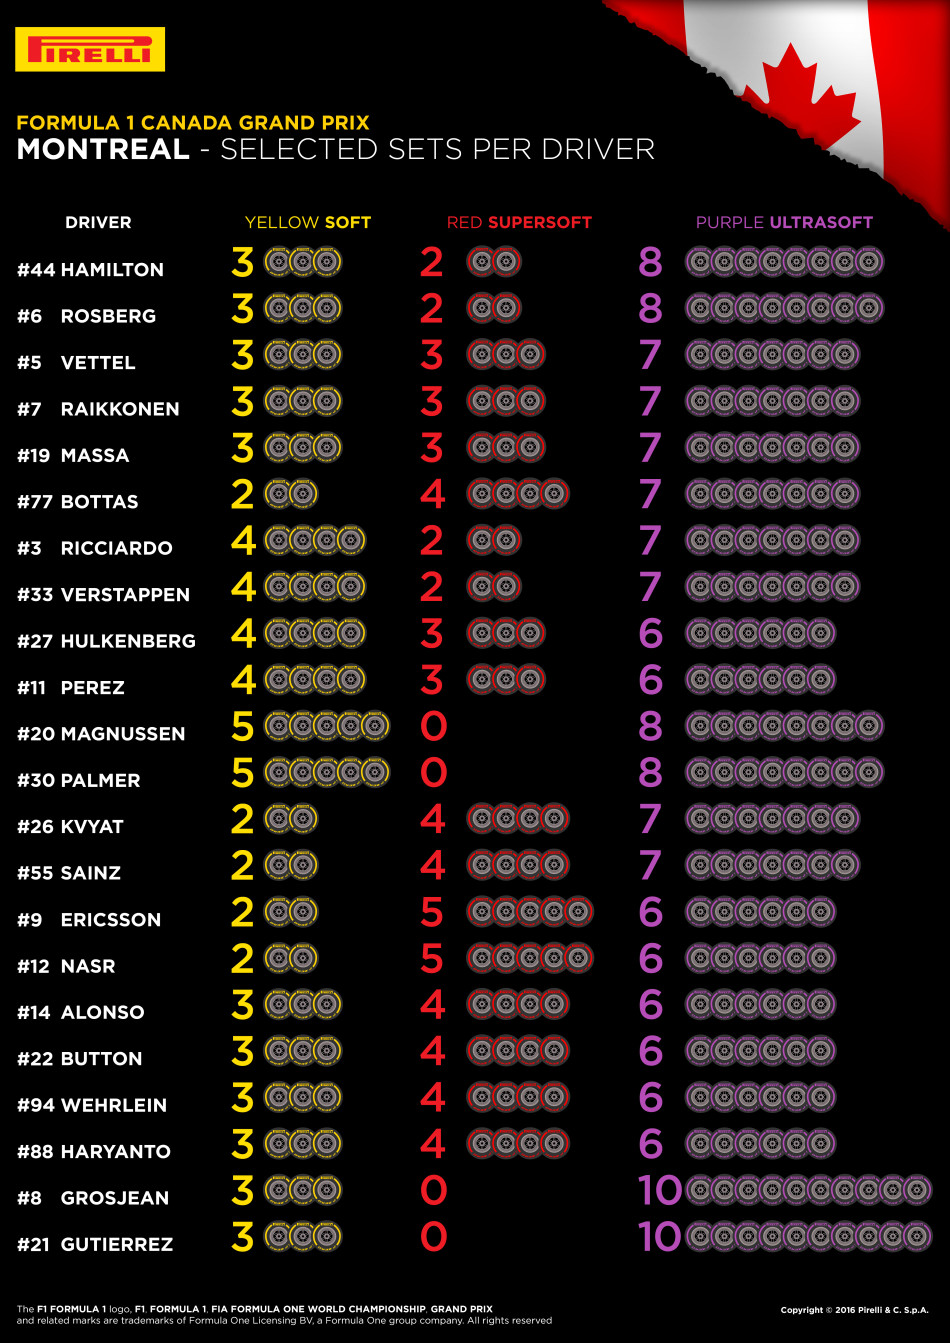 The FIA has communicated to Pirelli each team’s tyre choices for the forthcoming Canada Grand Prix.